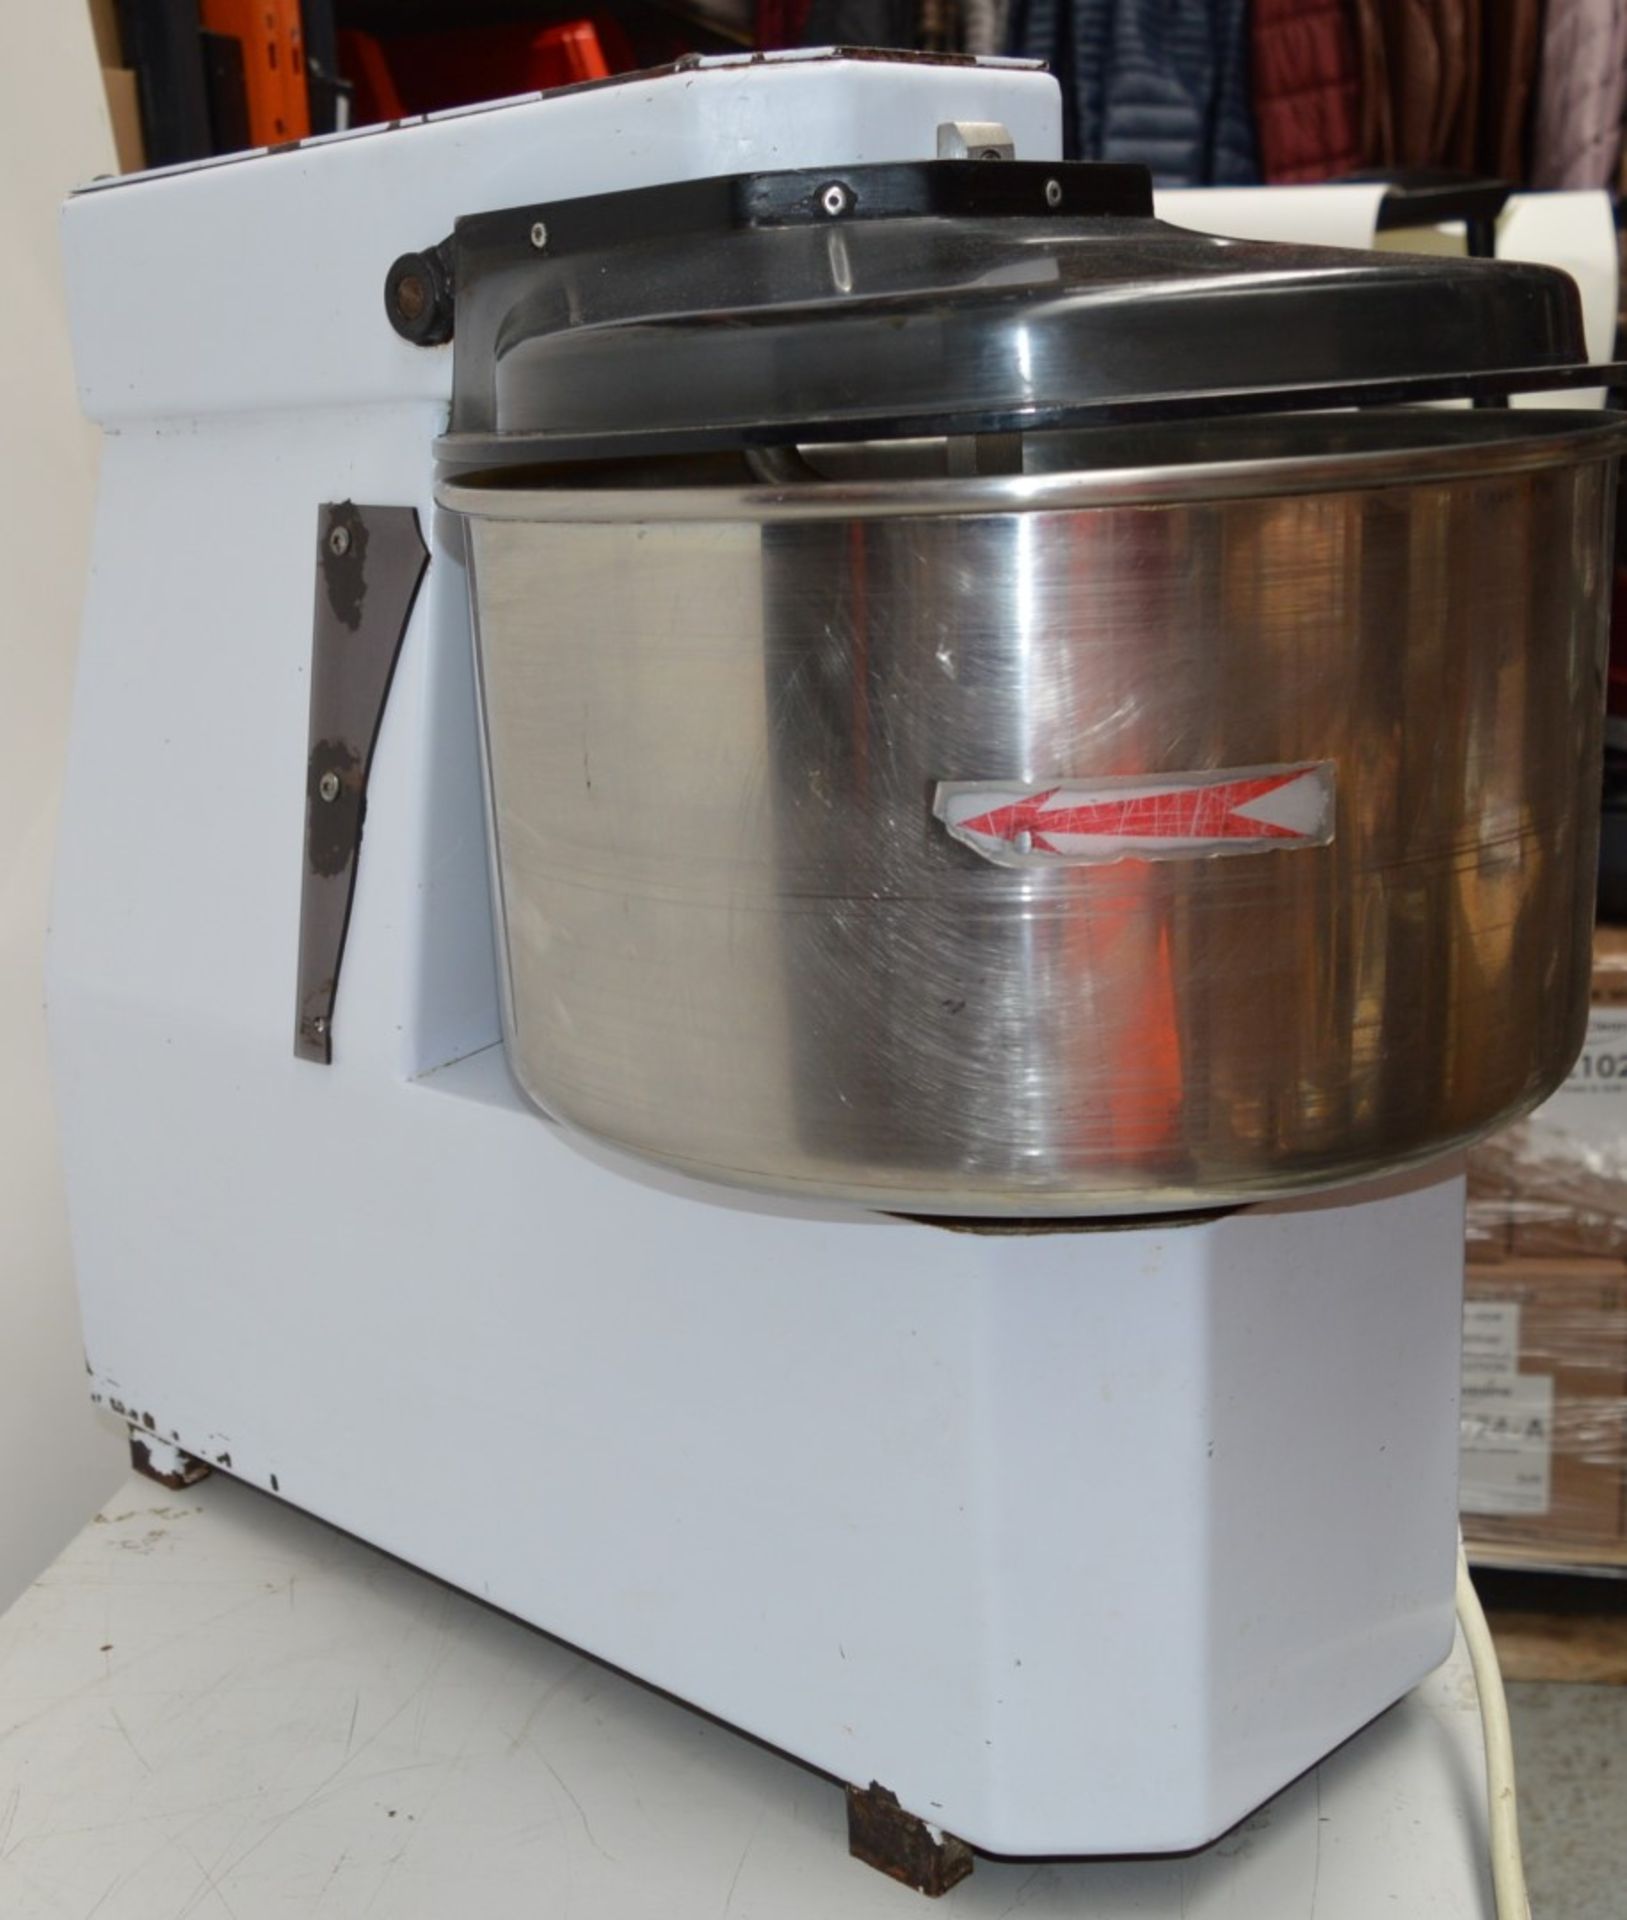 1 x Fimar Spiral Hook Dough Mixer - Type 1MP 16/S - Made in Italy - Heavy Duty Construction - H58 - Image 9 of 10